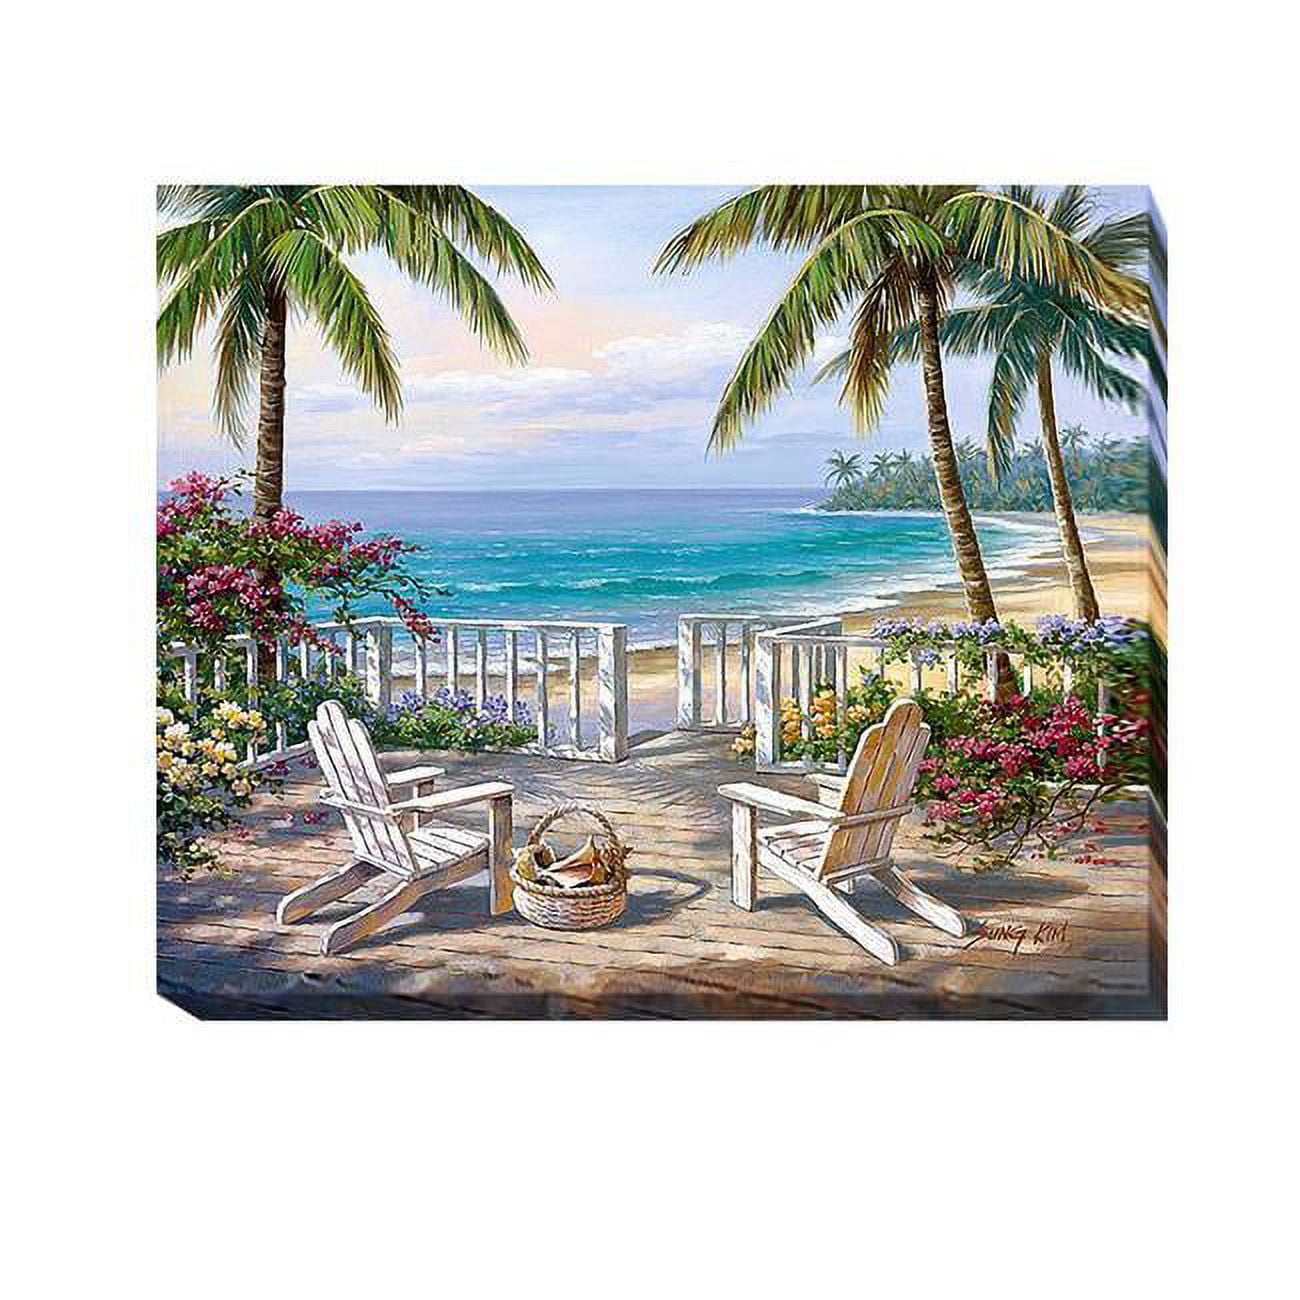 1518476ig Coastal View By Sung Kim Premium Gallery-wrapped Canvas Giclee Art - Ready-to-hang, 15 X 18 In.